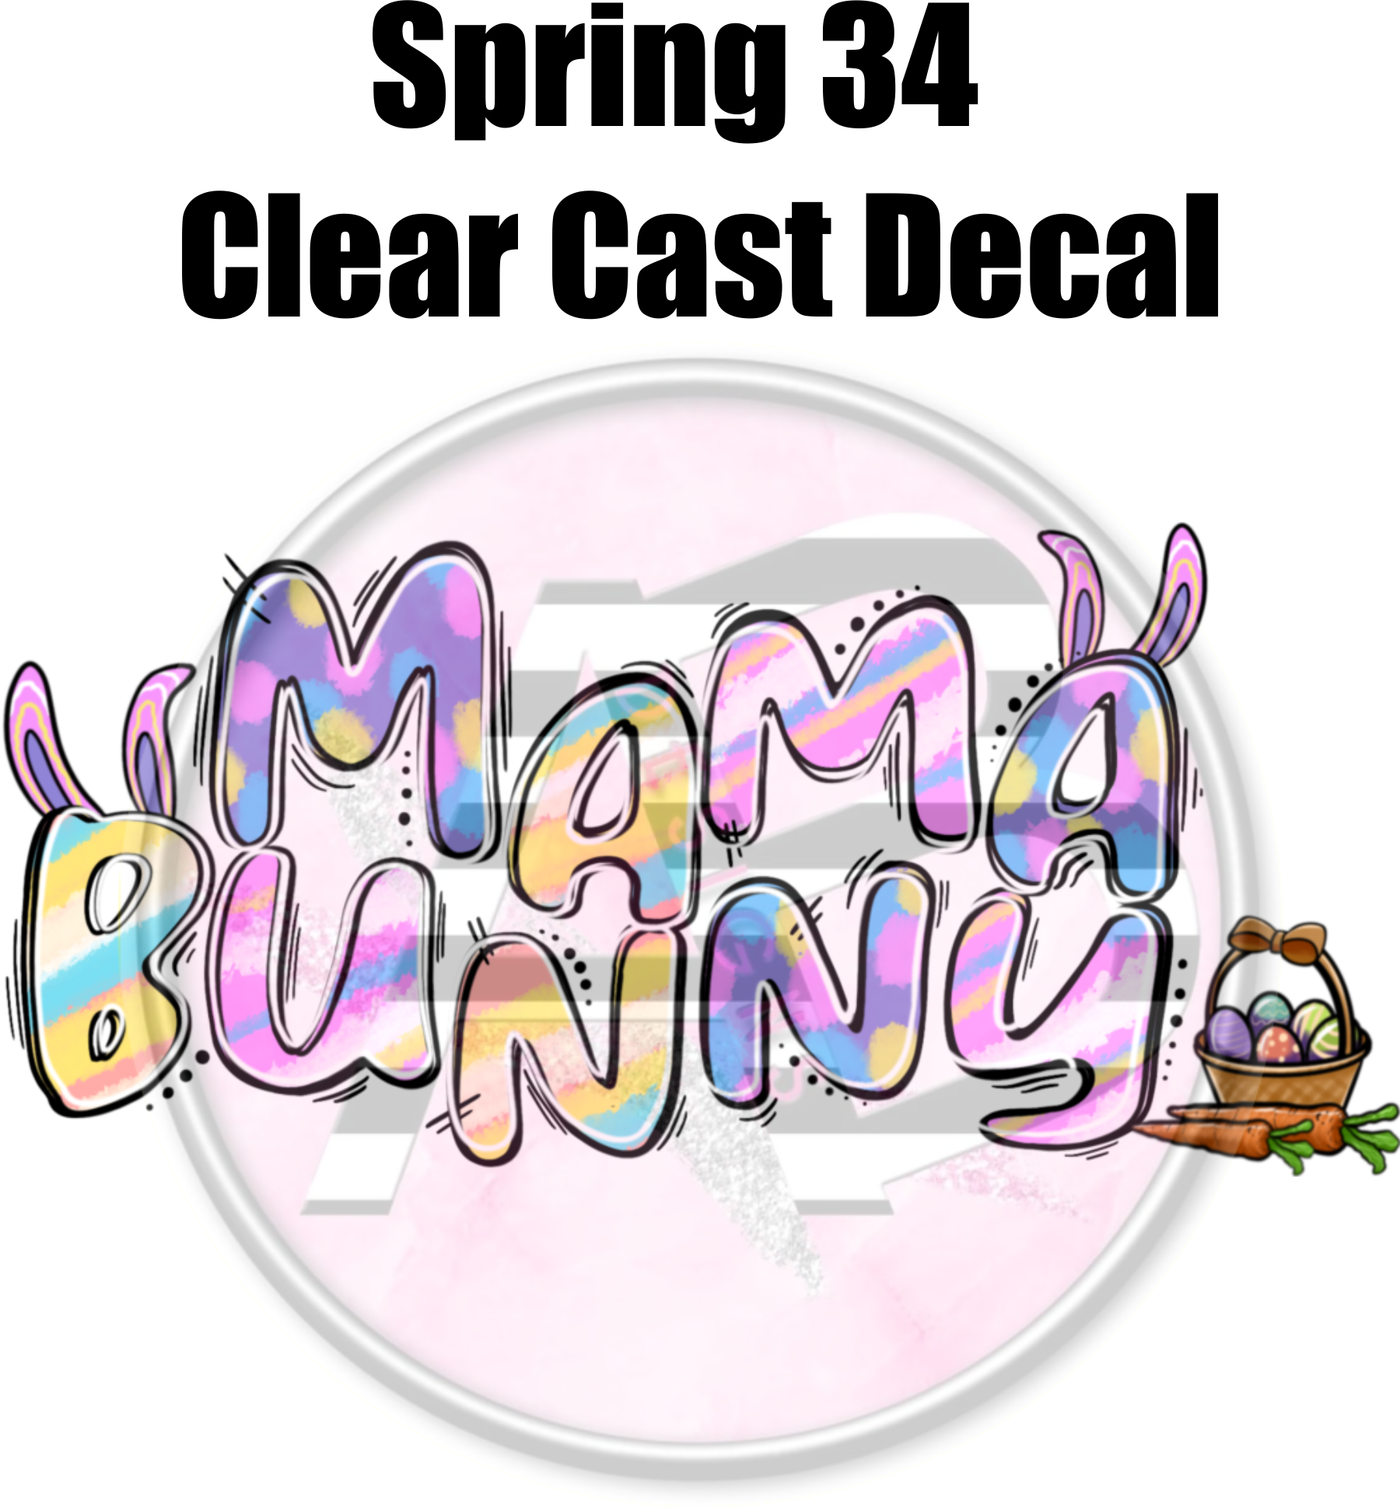 Spring 34 - Clear Cast Decal